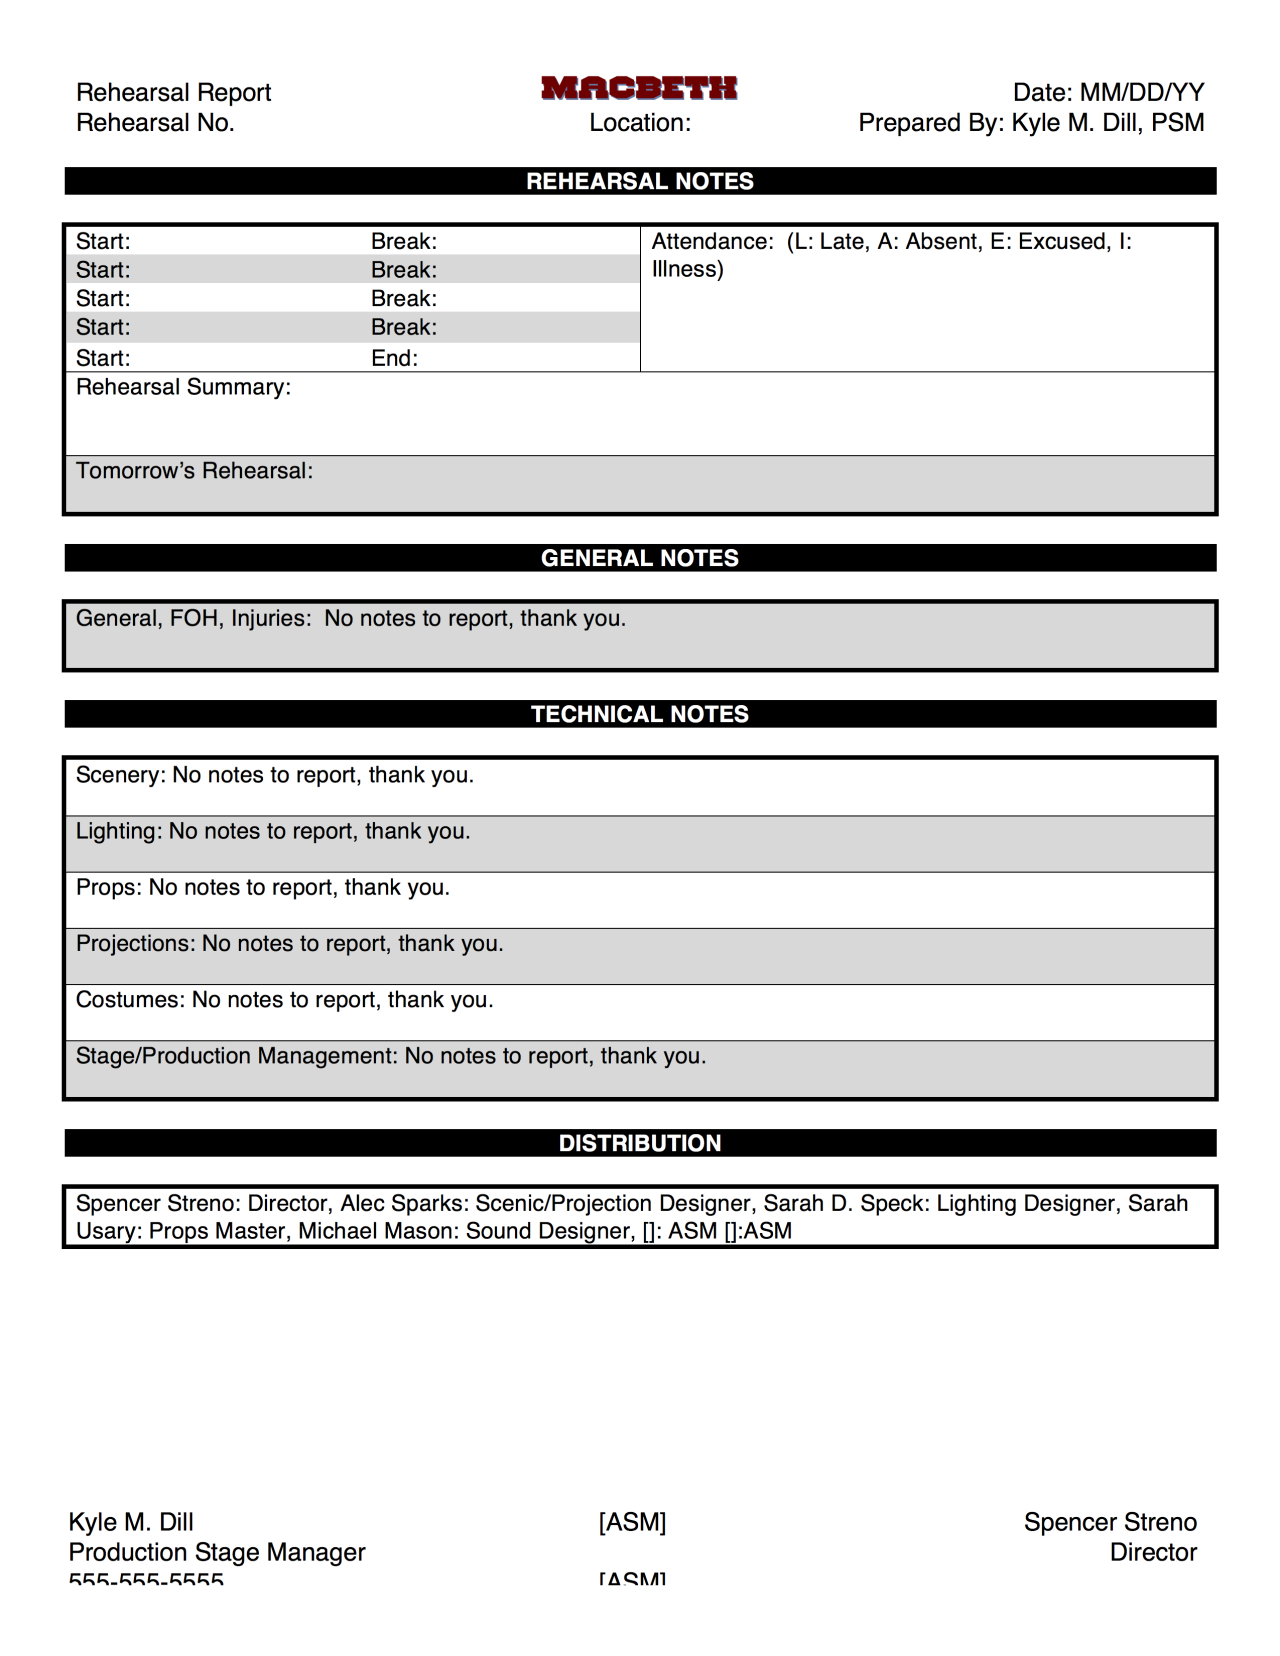 Macbeth@su Production Blog — Here's The Template For Our With Rehearsal Report Template